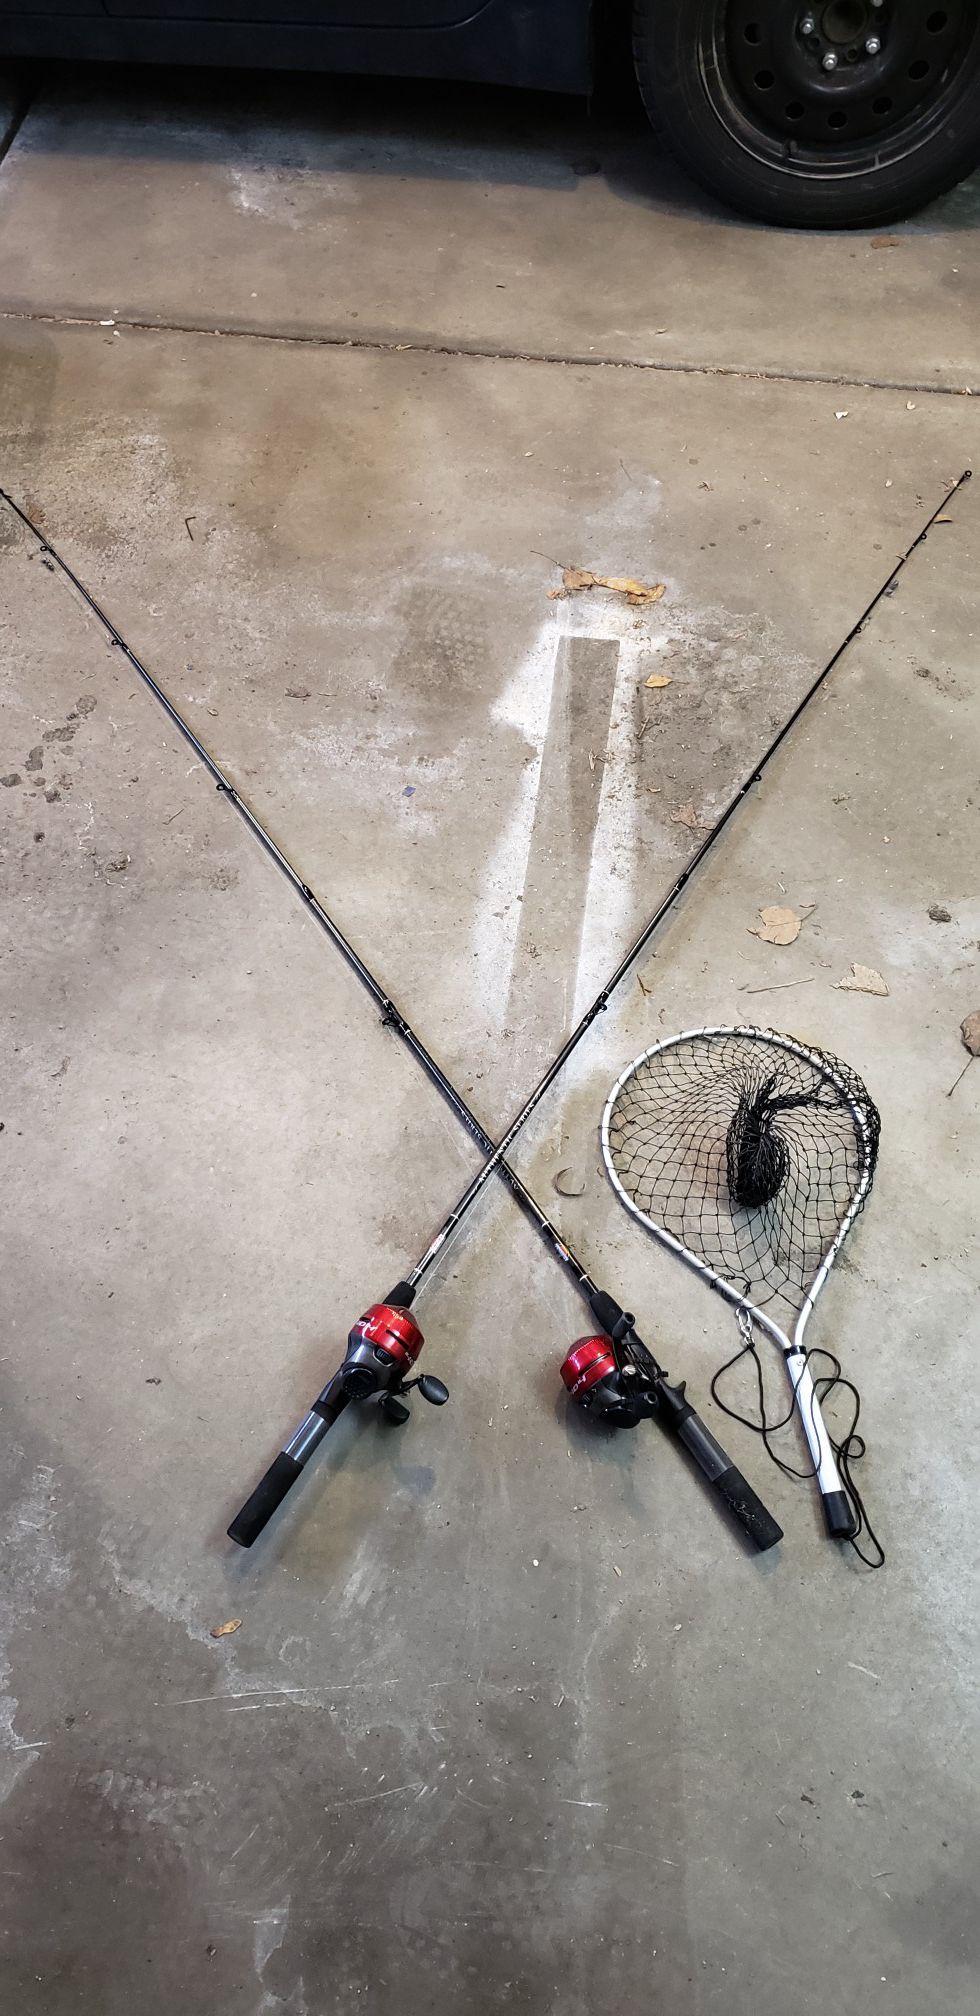 Fishing rods and reels + net